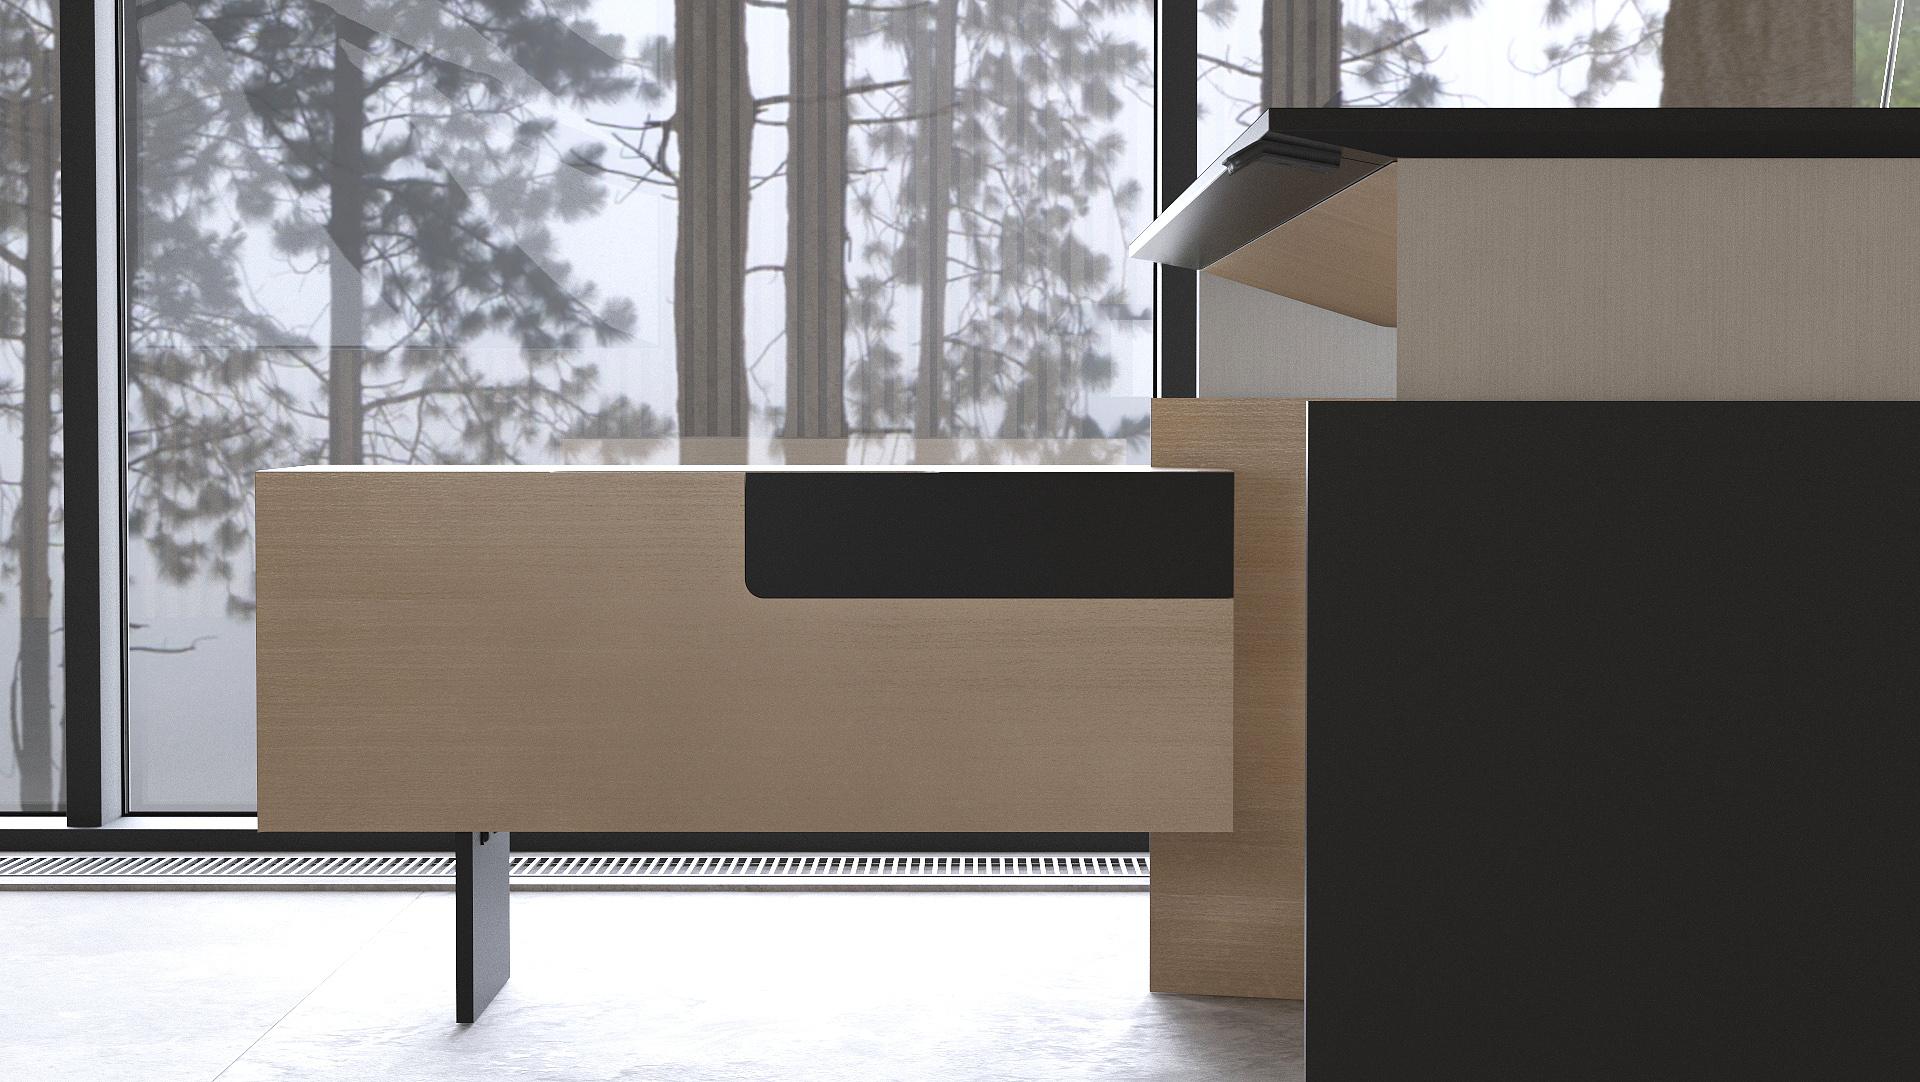 The personal pedestal drawers close flush complementing the sleek desk design